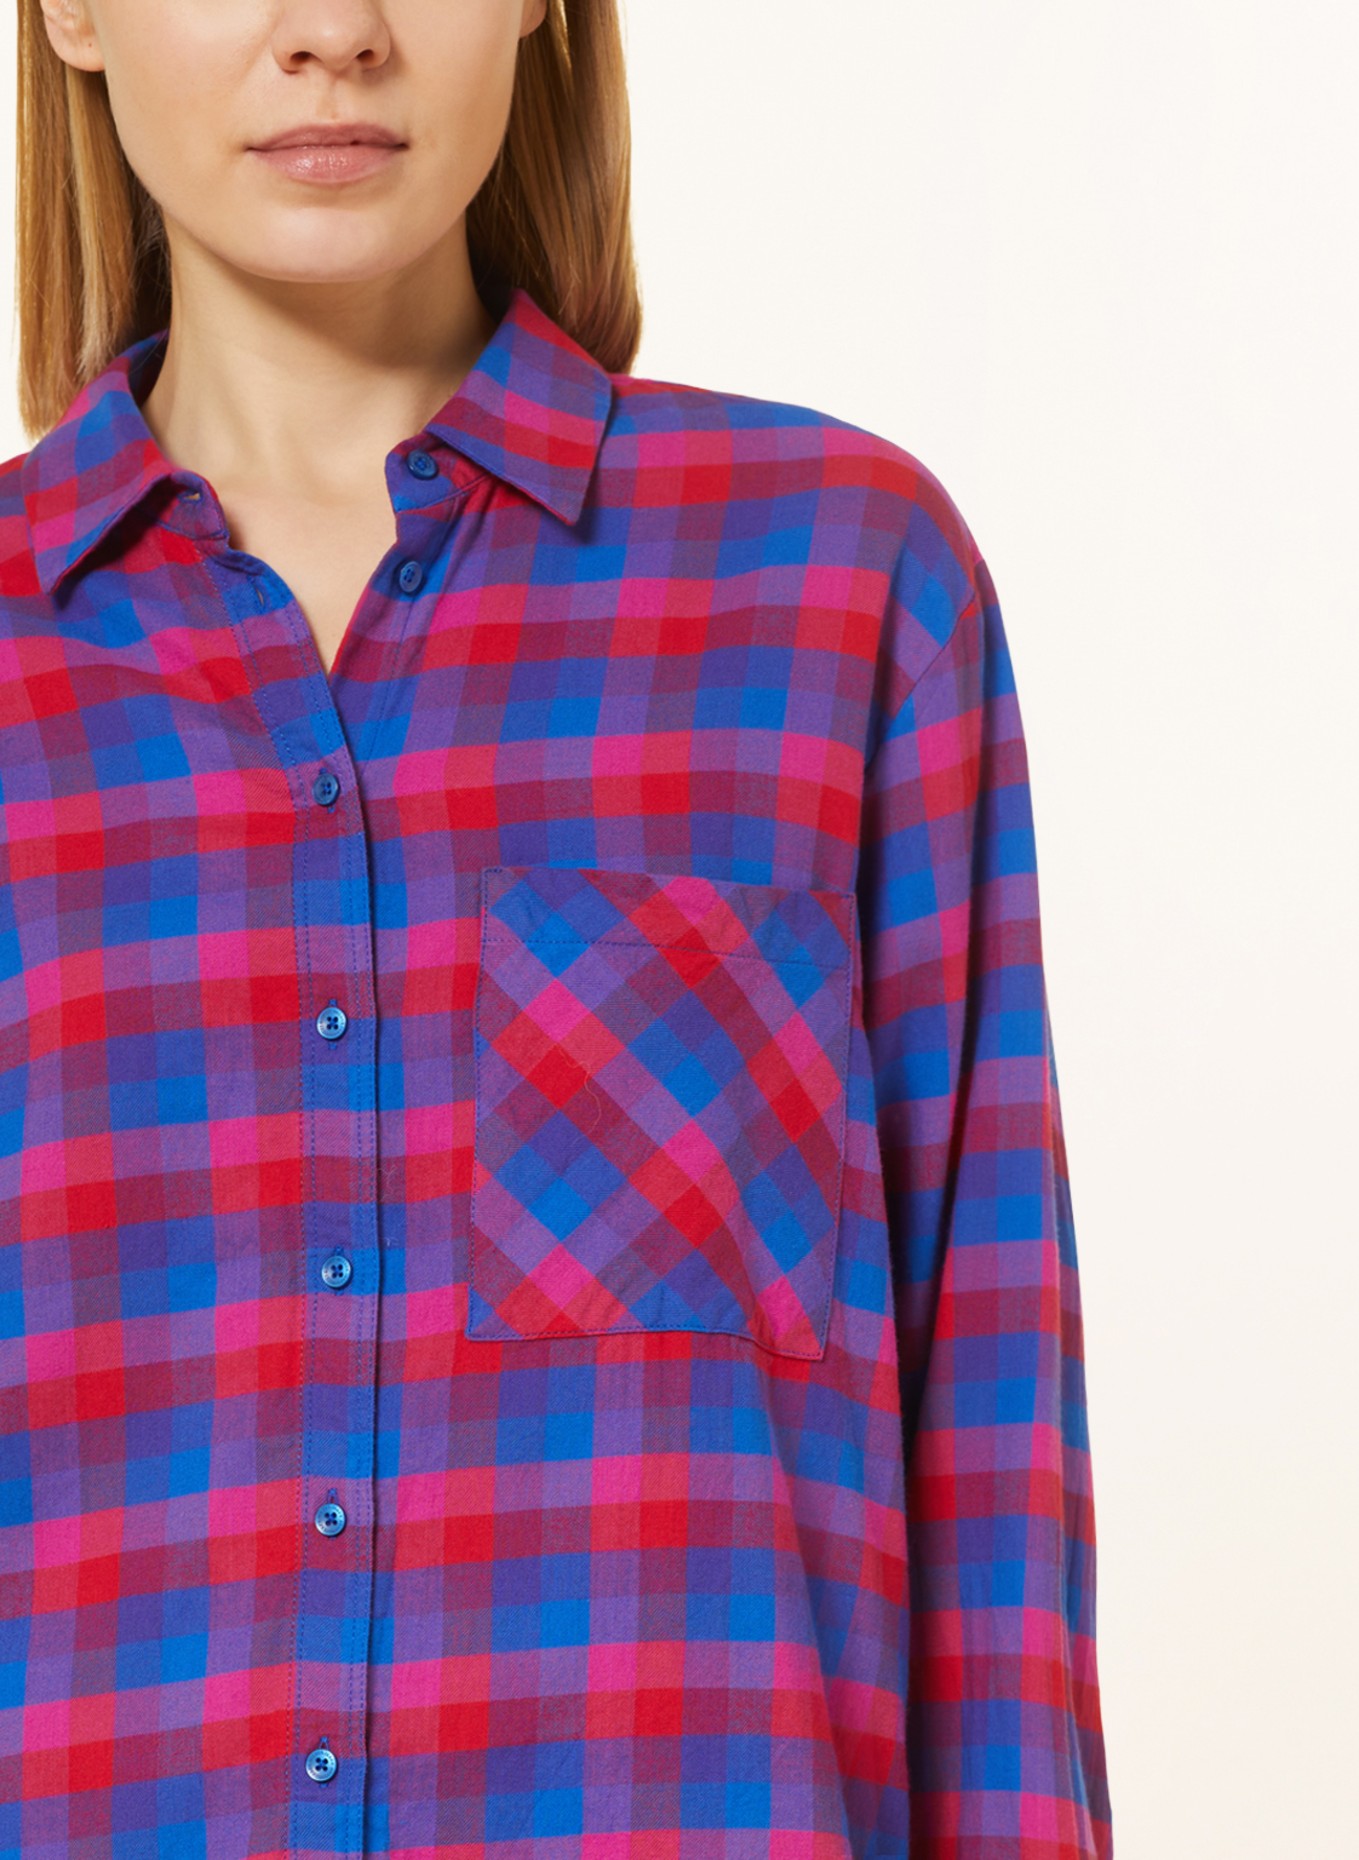 RISY & JERFS Shirt blouse LUCCA, Color: BLUE/ RED/ PINK (Image 4)